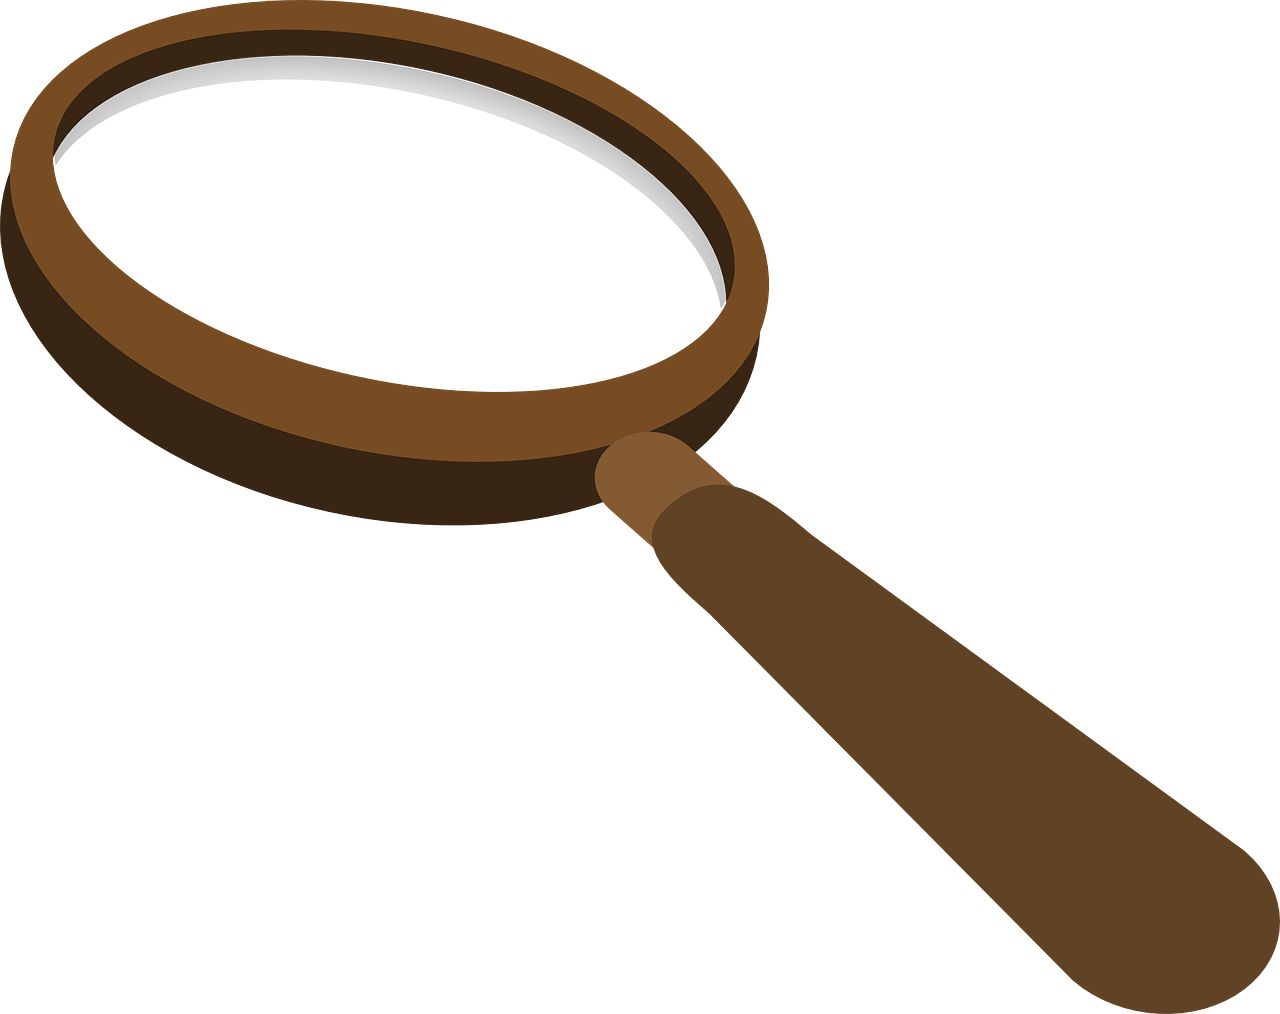 a magnifying glass with a wooden handle, a digital rendering, by Joseph Henderson, pixabay, hurufiyya, black and brown colors, everyday plain object, inspect in inventory image, cartoonish and simplistic